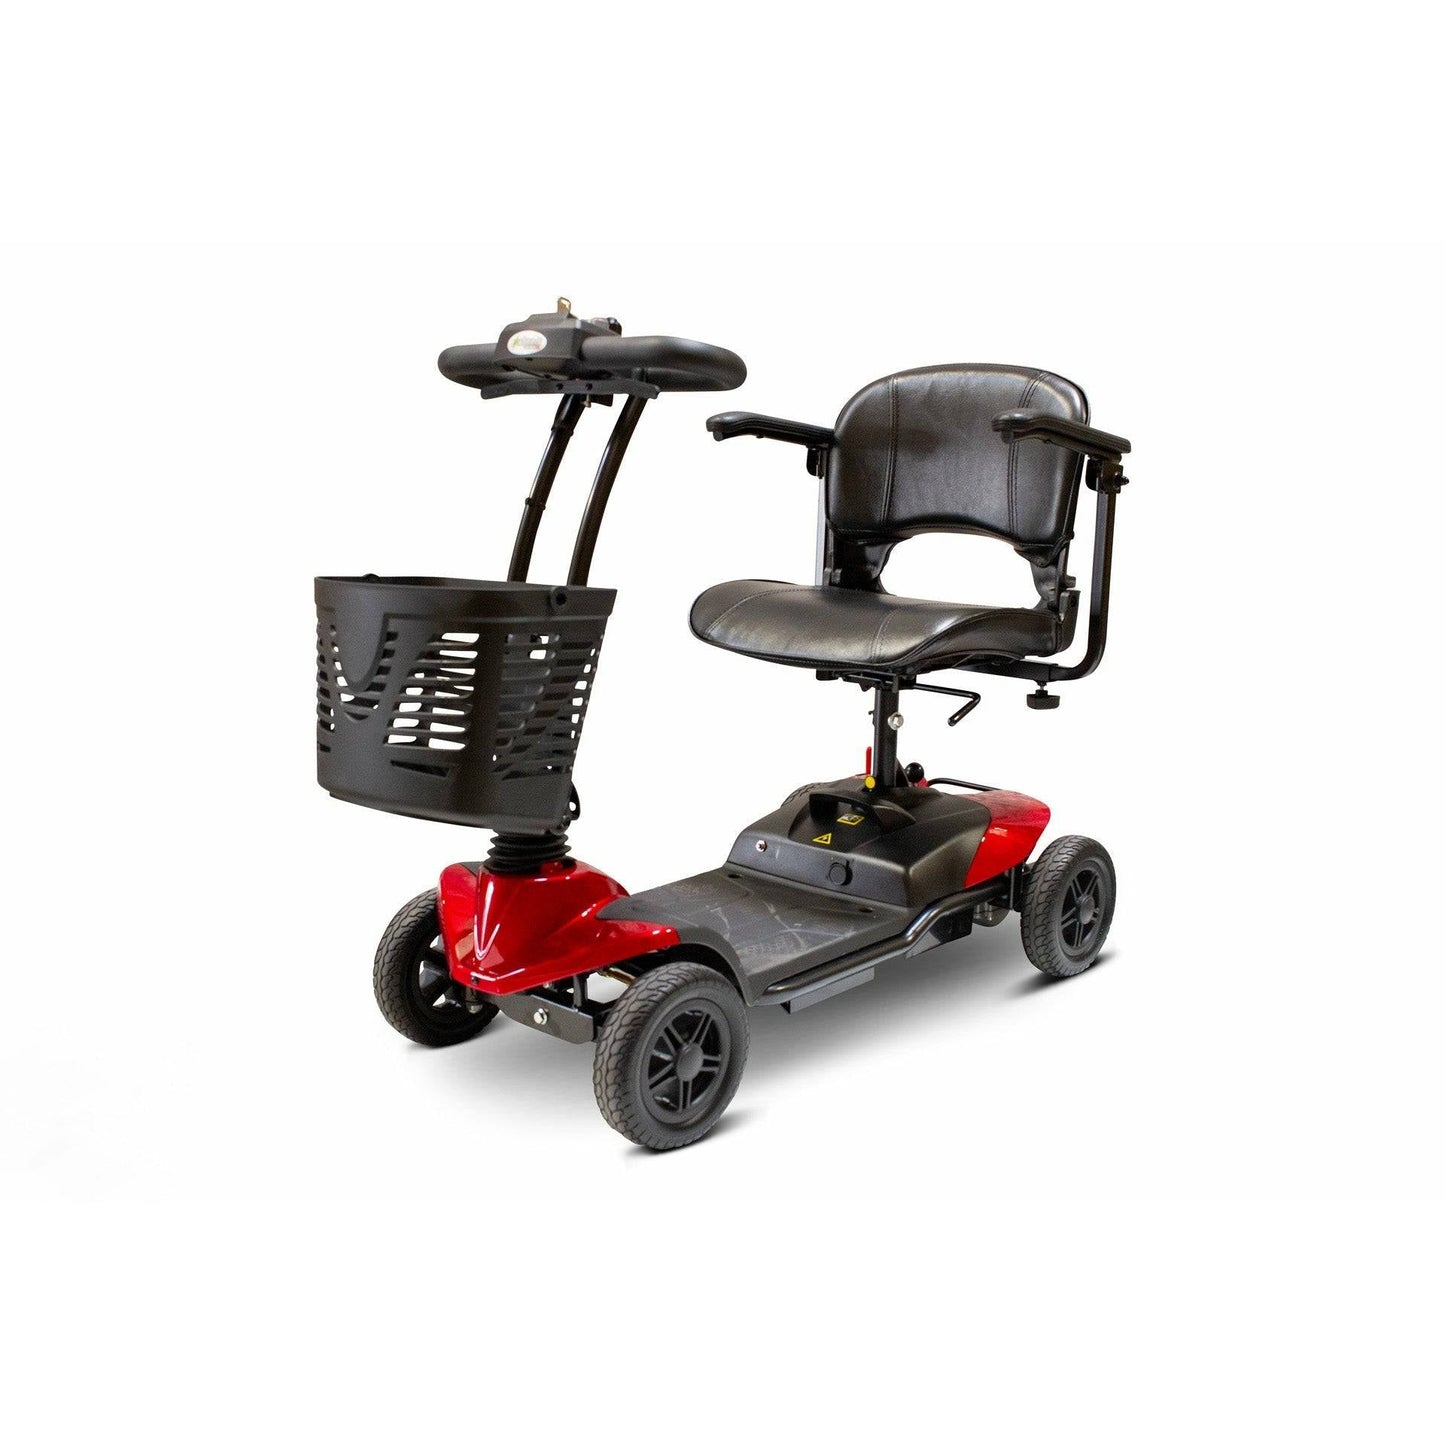 EWheels EW-M35 Travel Mobility Scooter in Red